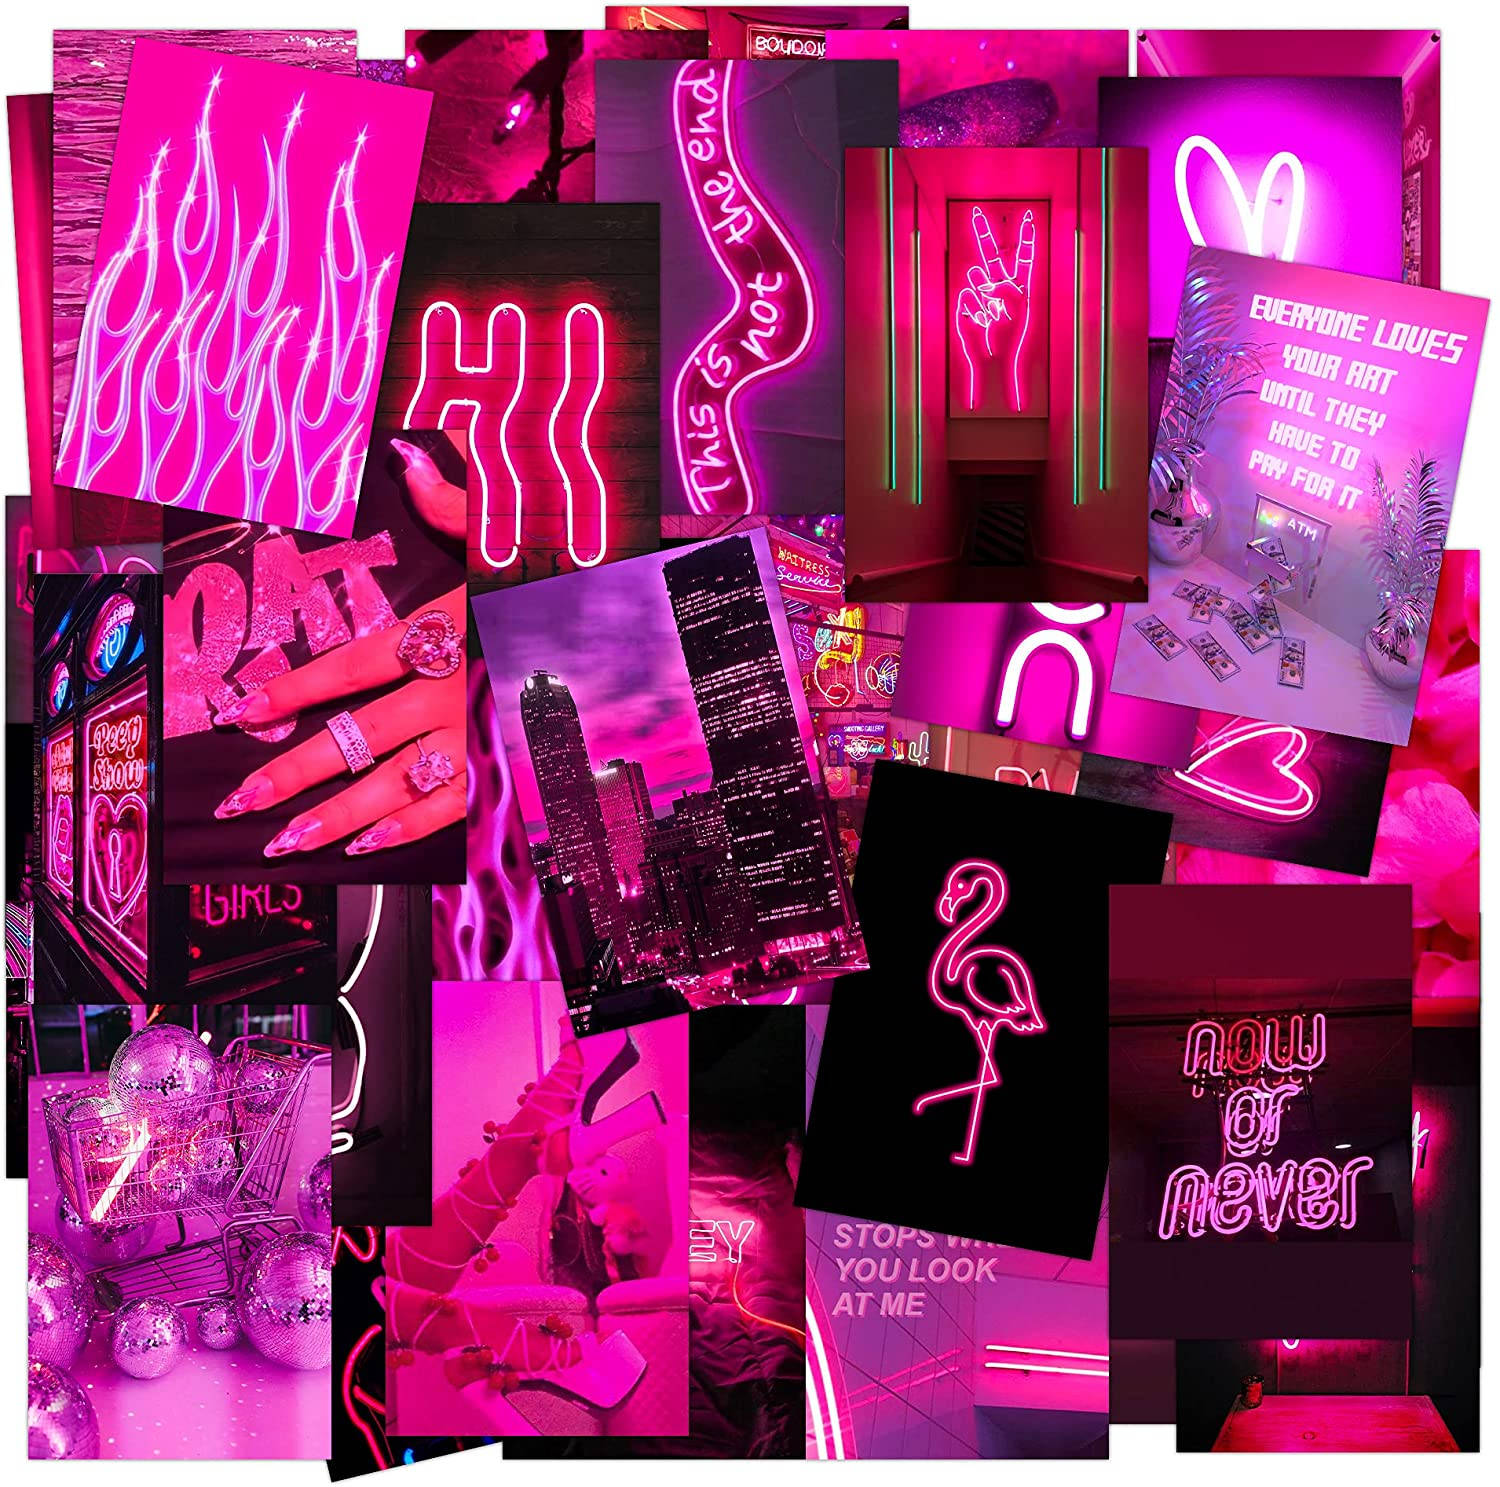 Messy Collage Of Neon Pink Photos Wallpaper